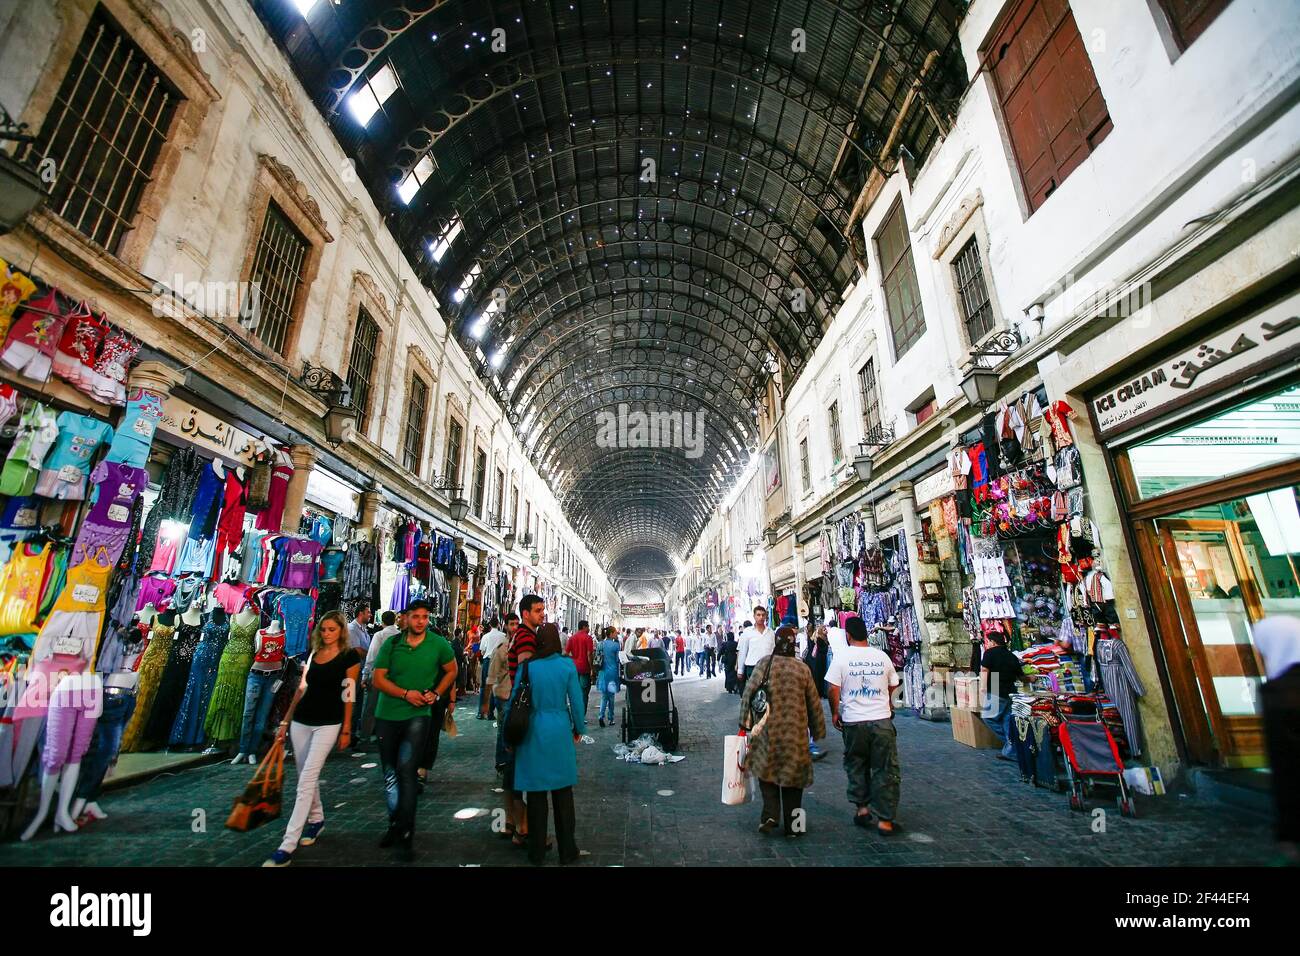 Pre-war Syria.People in Souq Al-Hamidiyah, the Old City's main souq.The number of Syrians who fled the Civil War grew to 4 million 185 thousand. Stock Photo